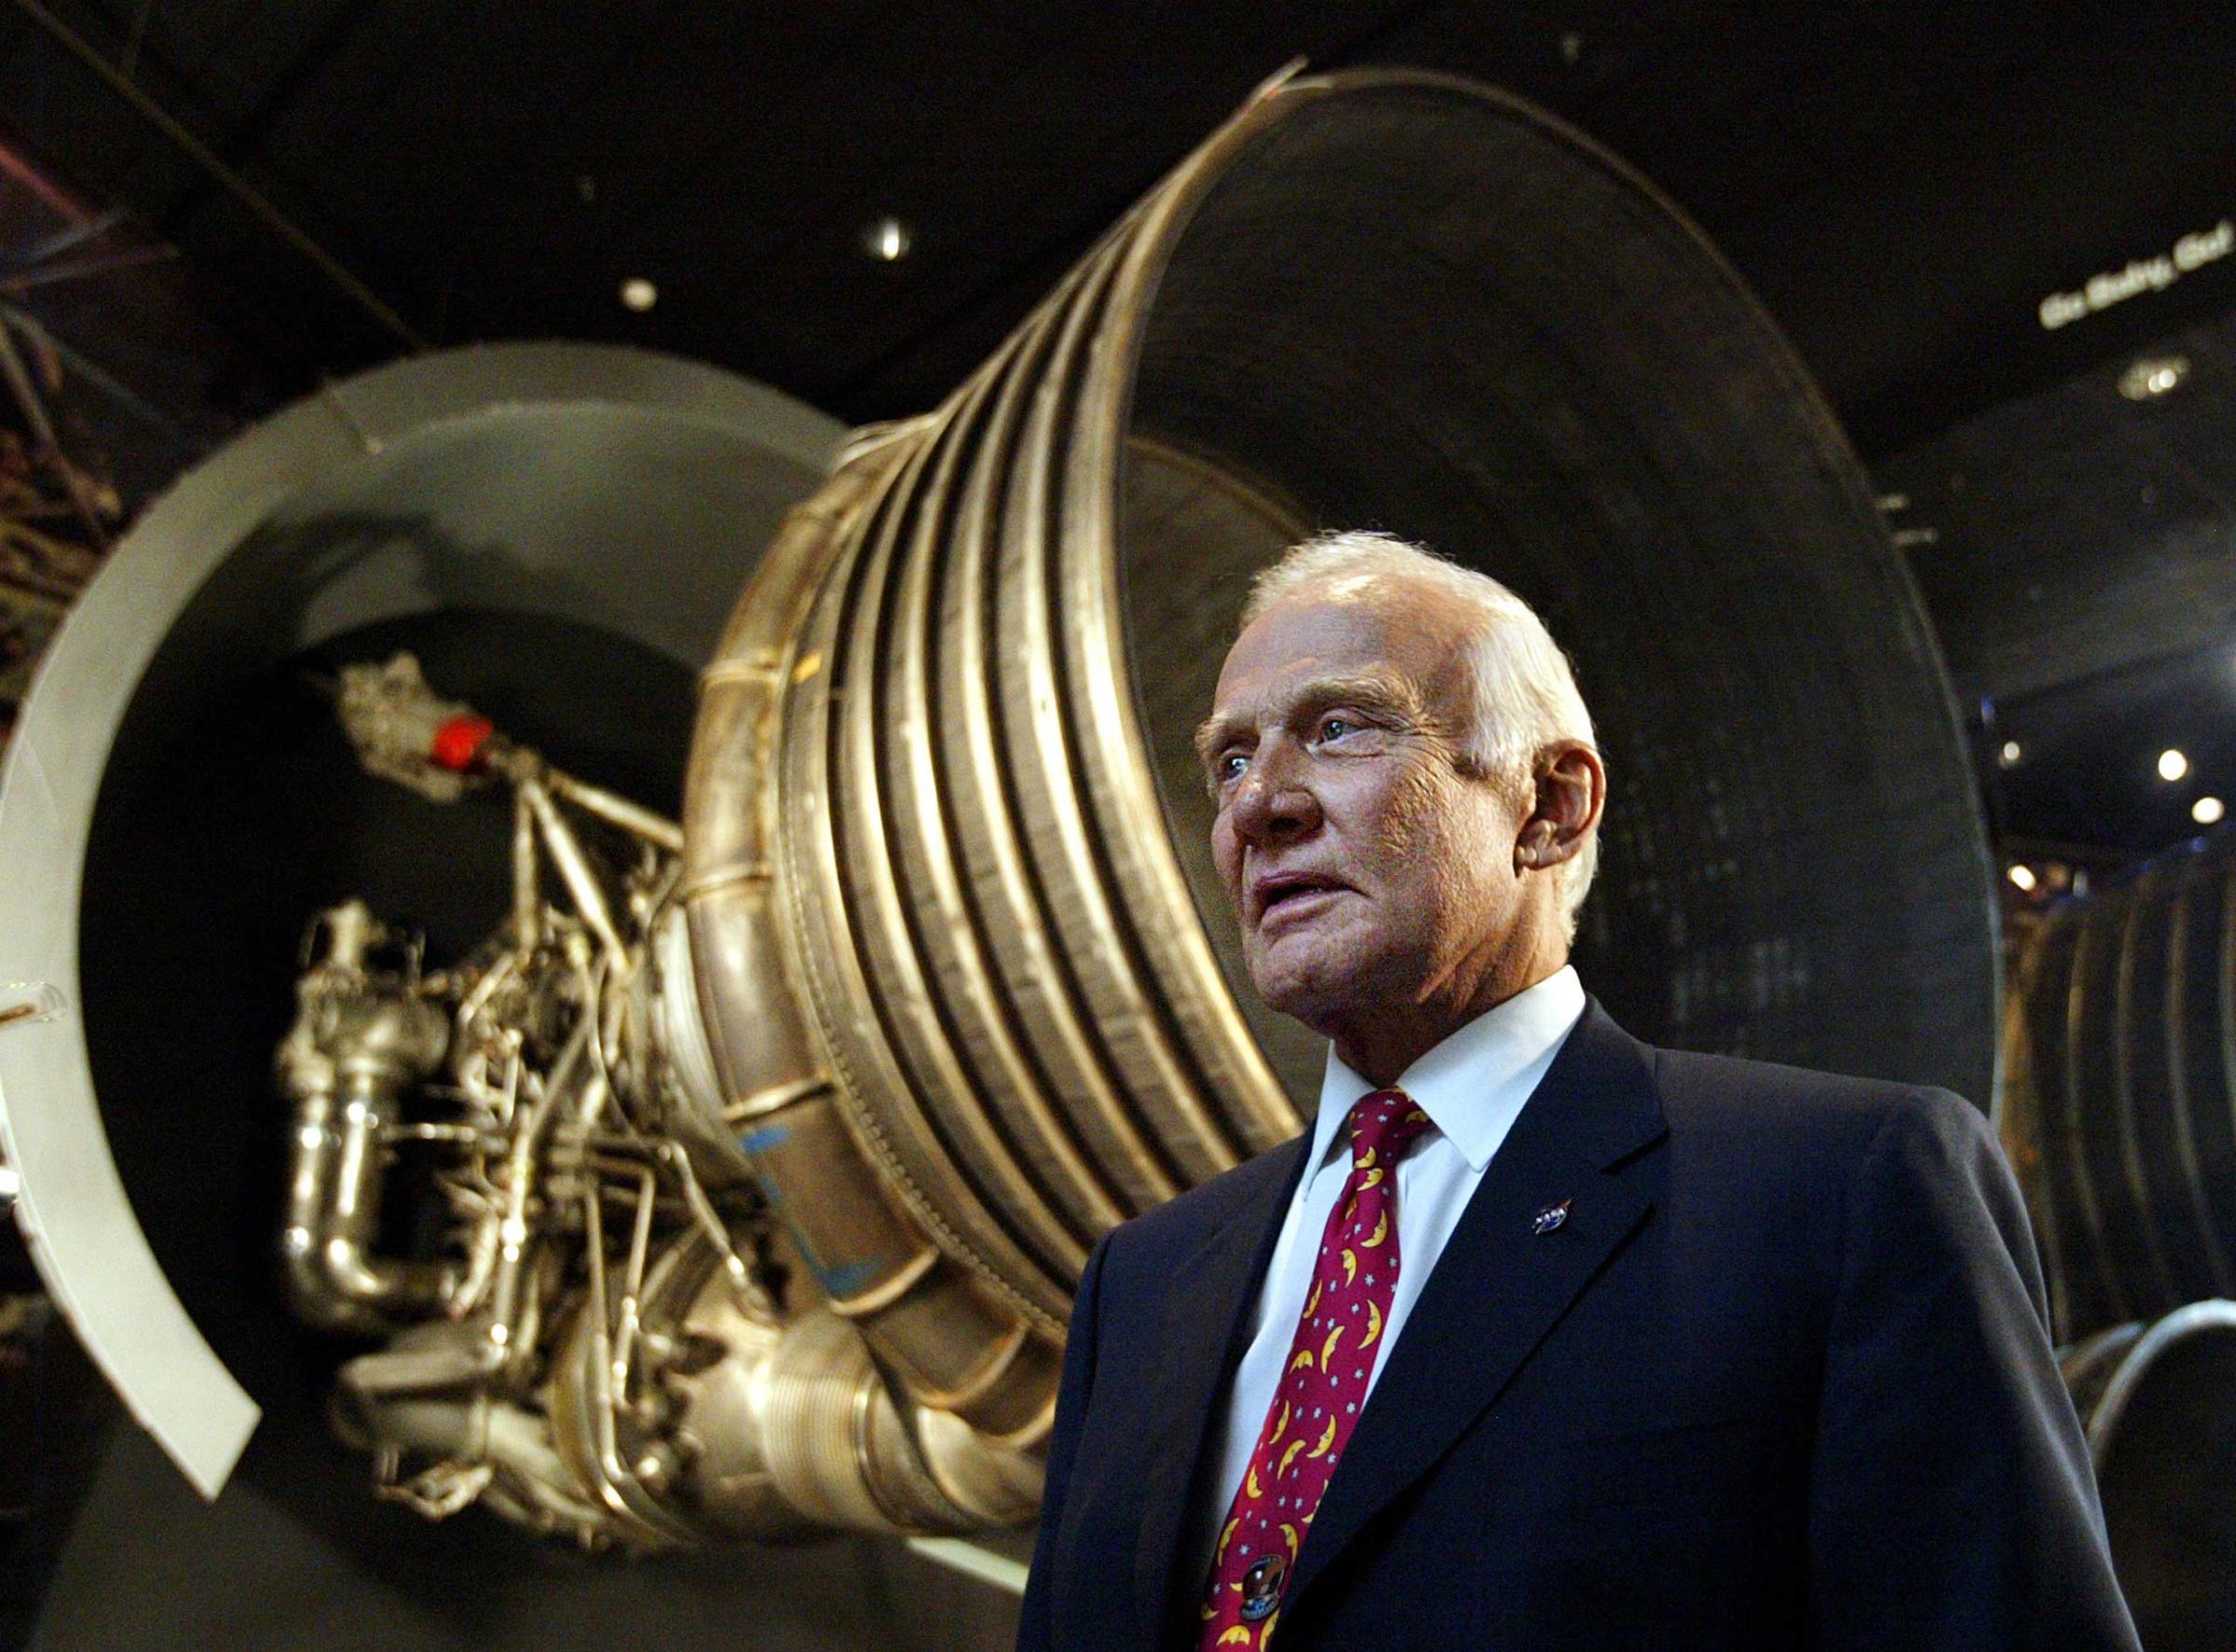 Apollo 11 astronaut Buzz Aldrin, speaks to a reporter in front of the Saturn 5 Aft End, the F-1 rocket engines of the first stage of the Apollo 11/Saturn 5 launch vehicle, Tuesday, July 20, 2004, in Washington. The first moon landing marks its 35th year anniversary. (AP Photo/Manuel Balce Ceneta)